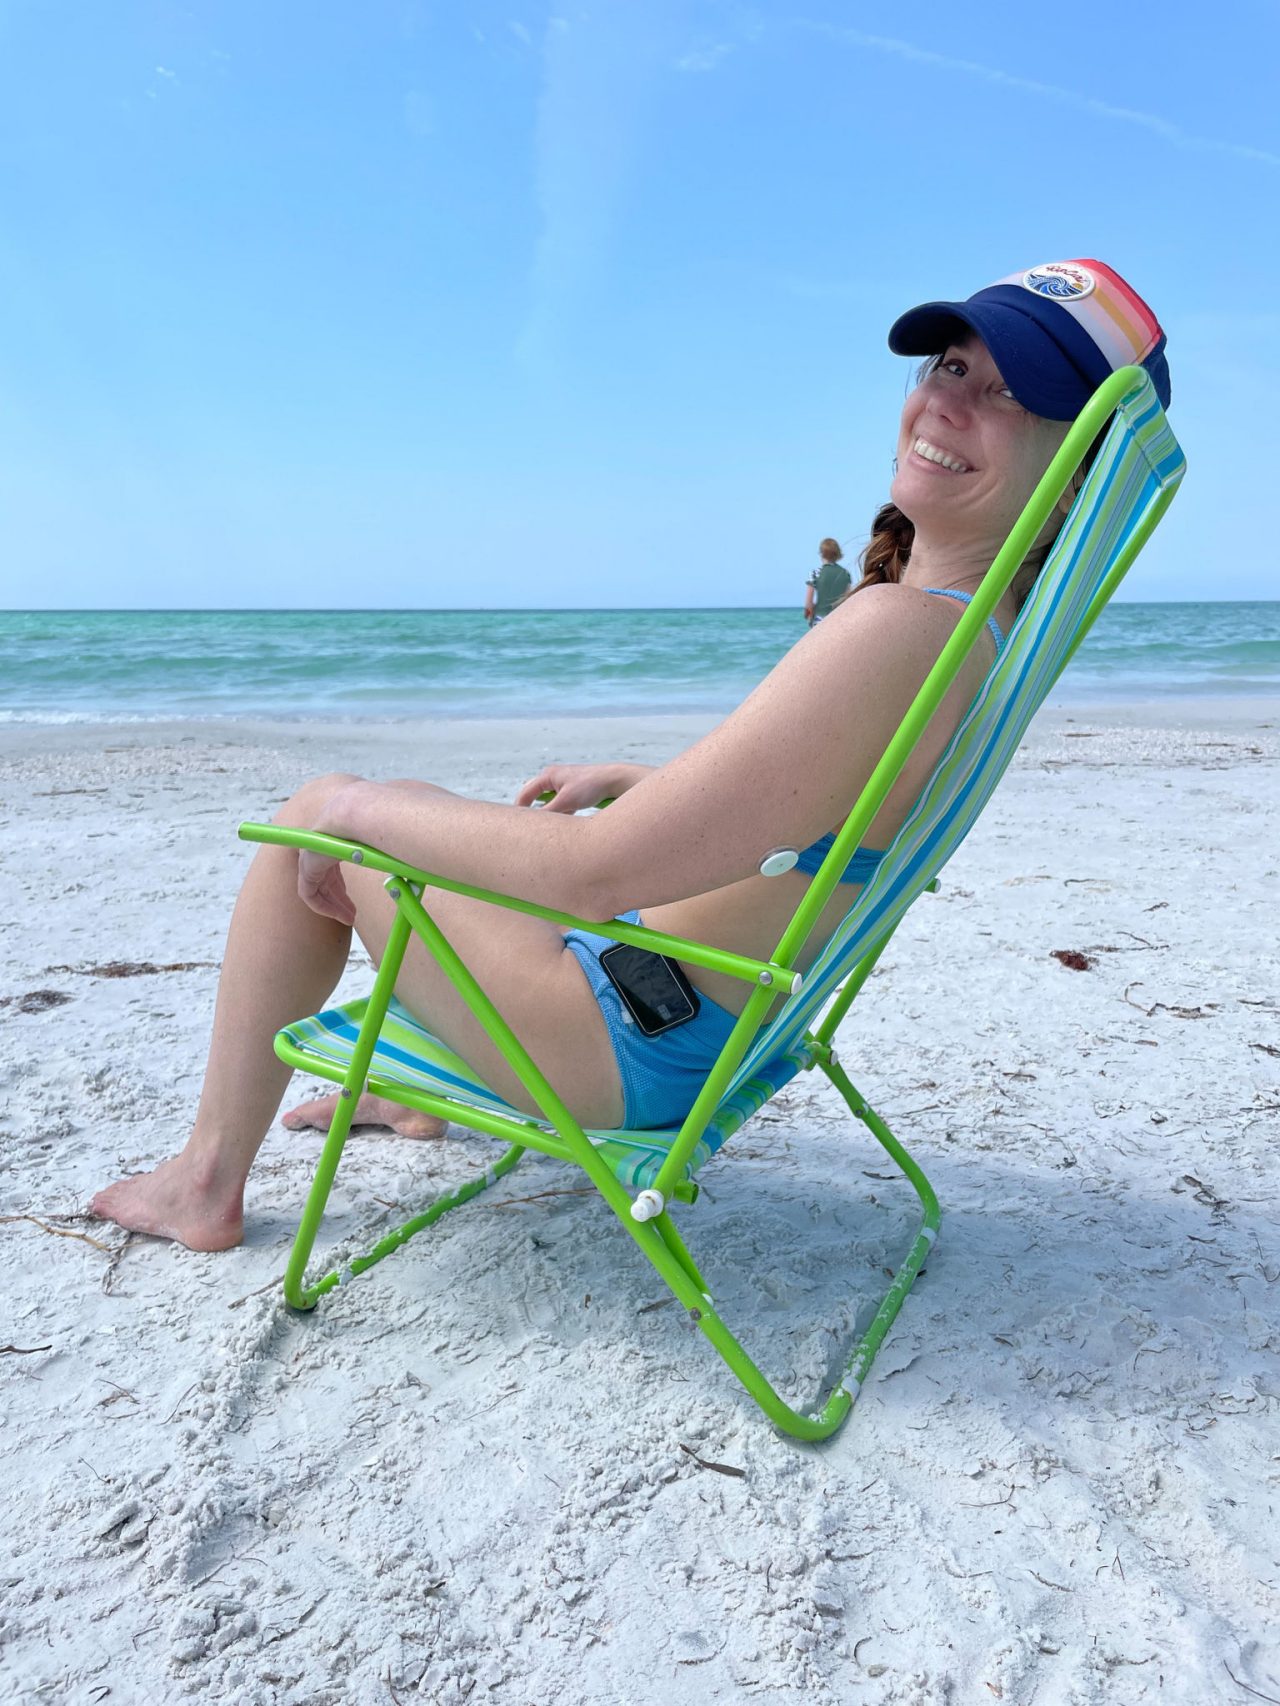 Erin, blog author, sitting on a beach chair smiling in frot of the ocean with FreeStyle Libre Sensor visible on the back of her upper arm